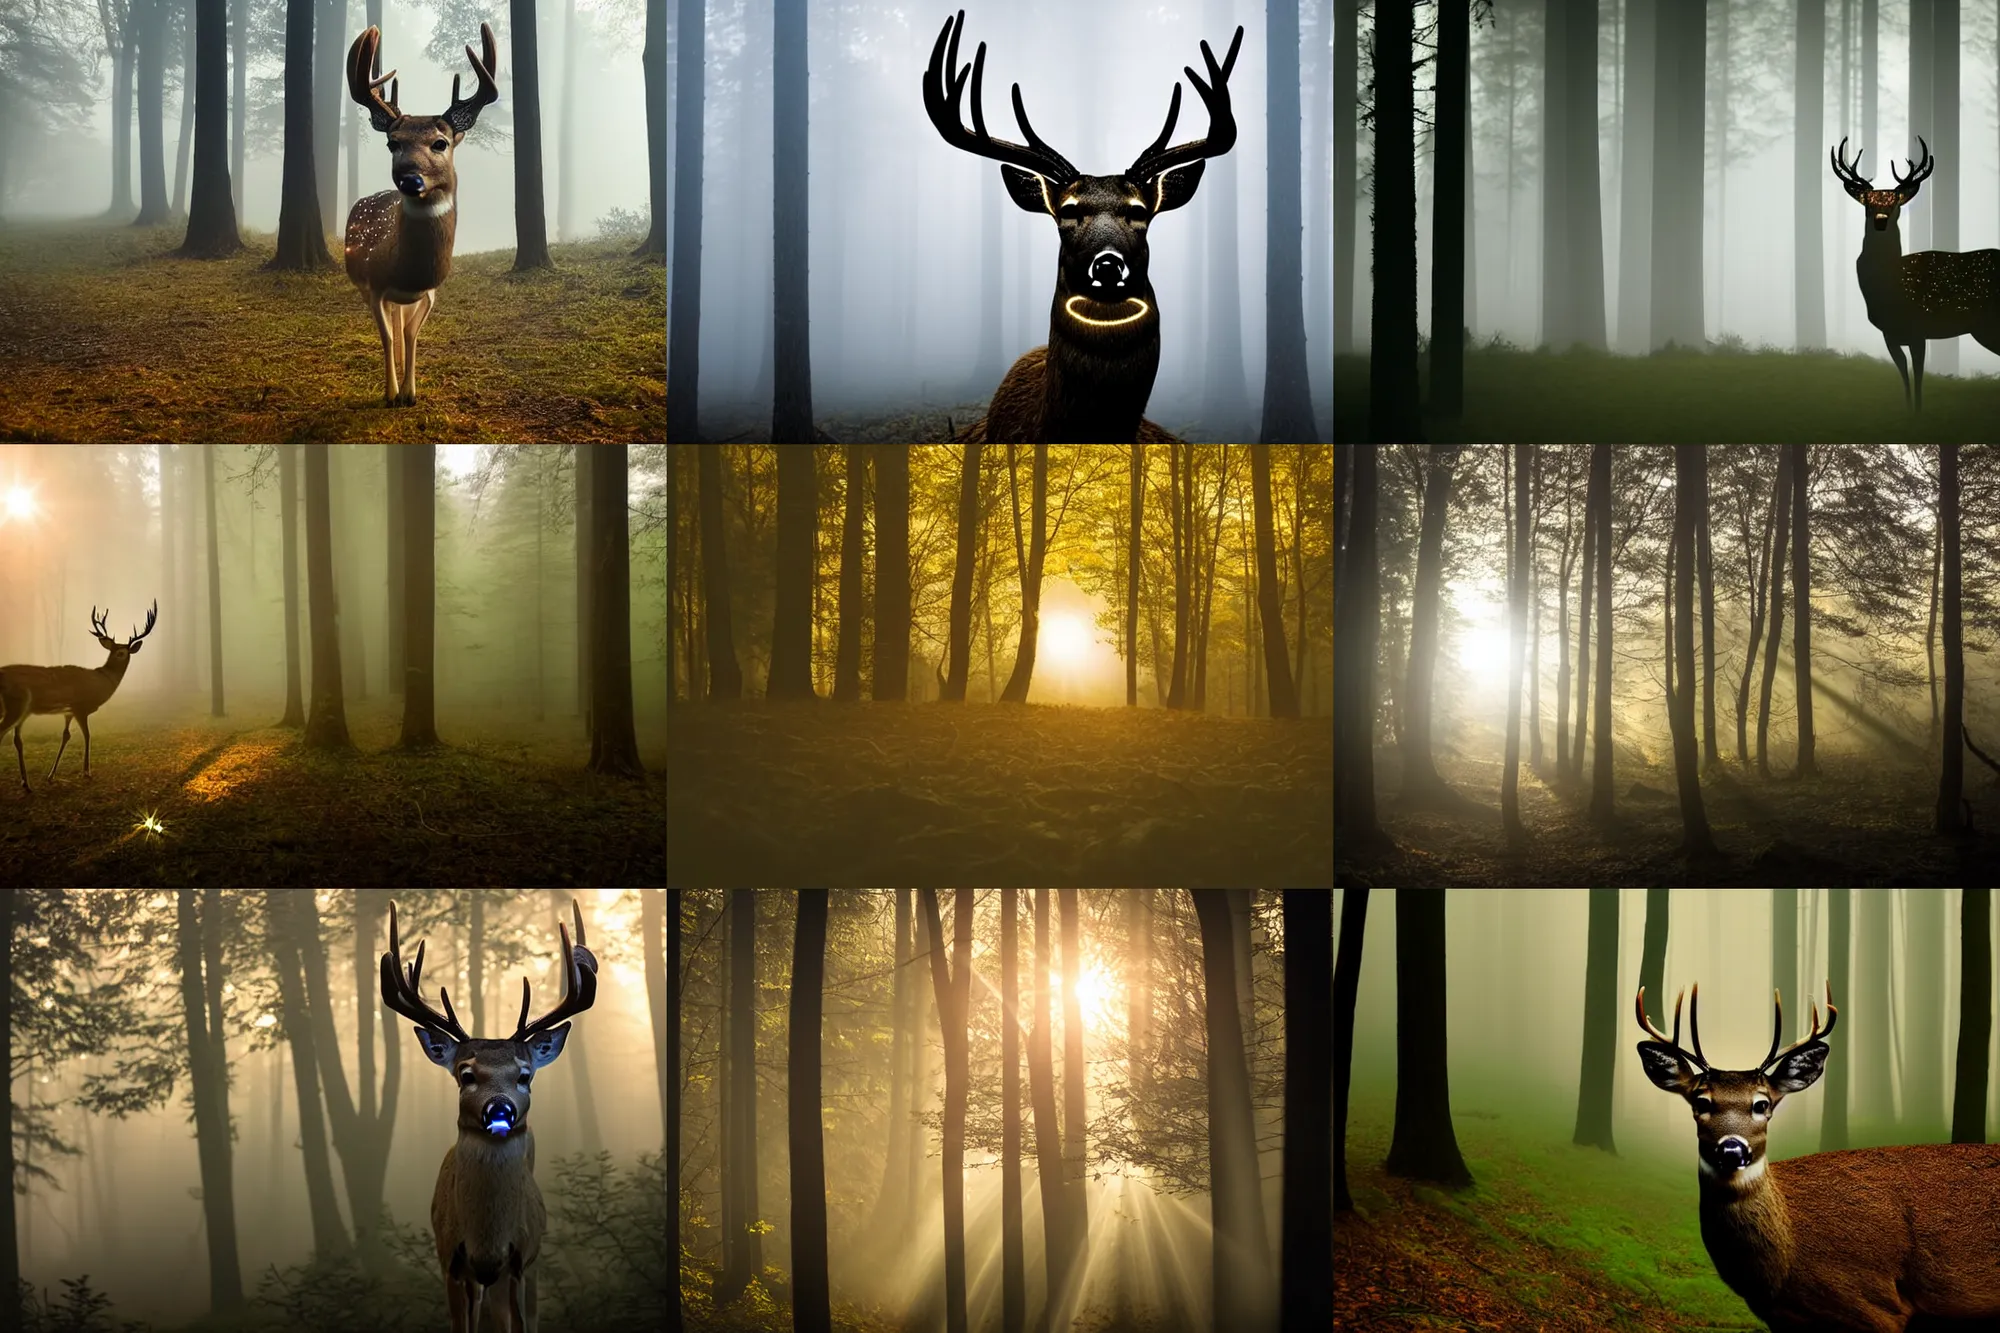 Prompt: shining glowing illuminated eyes, a close up of the head of a deer, background of a landscape misty forest scene, the sun glistening through the trees